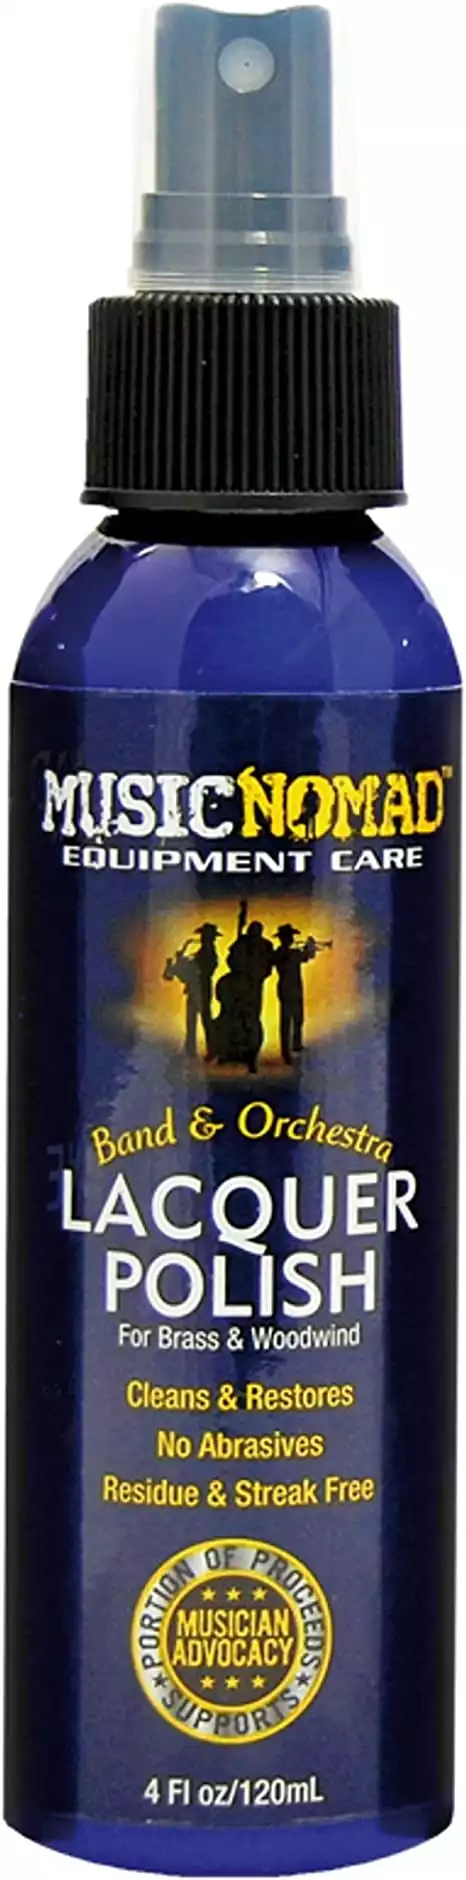 Music Nomad MN700 Lacquer Polish